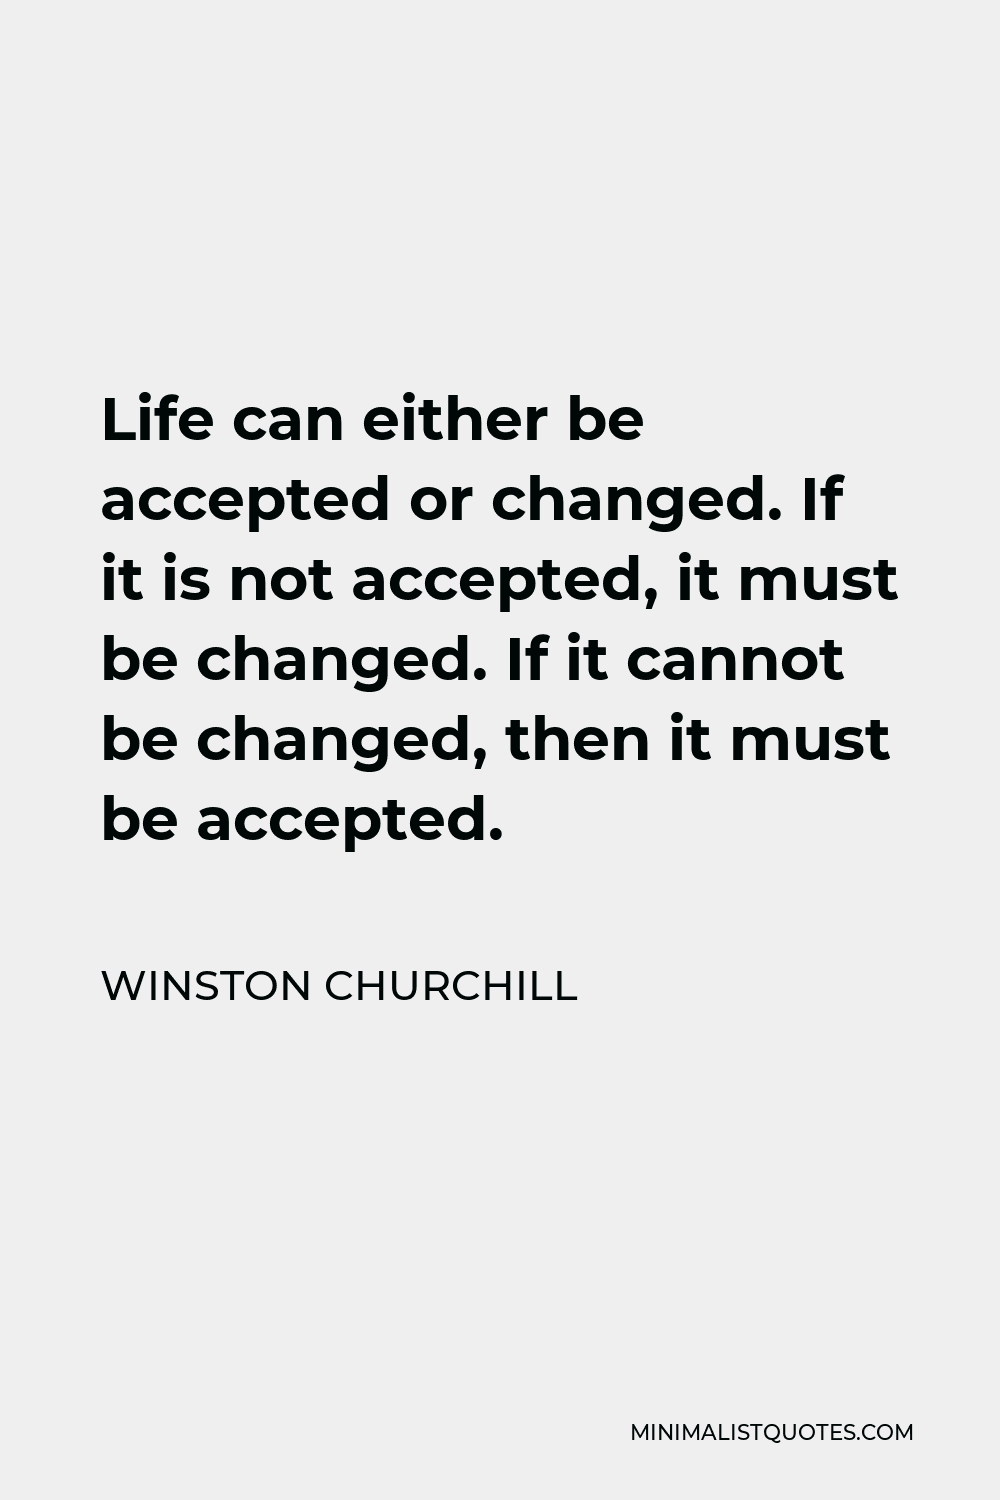 Winston Churchill Quote - Life can either be accepted or changed. If it is not accepted, it must be changed. If it cannot be changed, then it must be accepted.